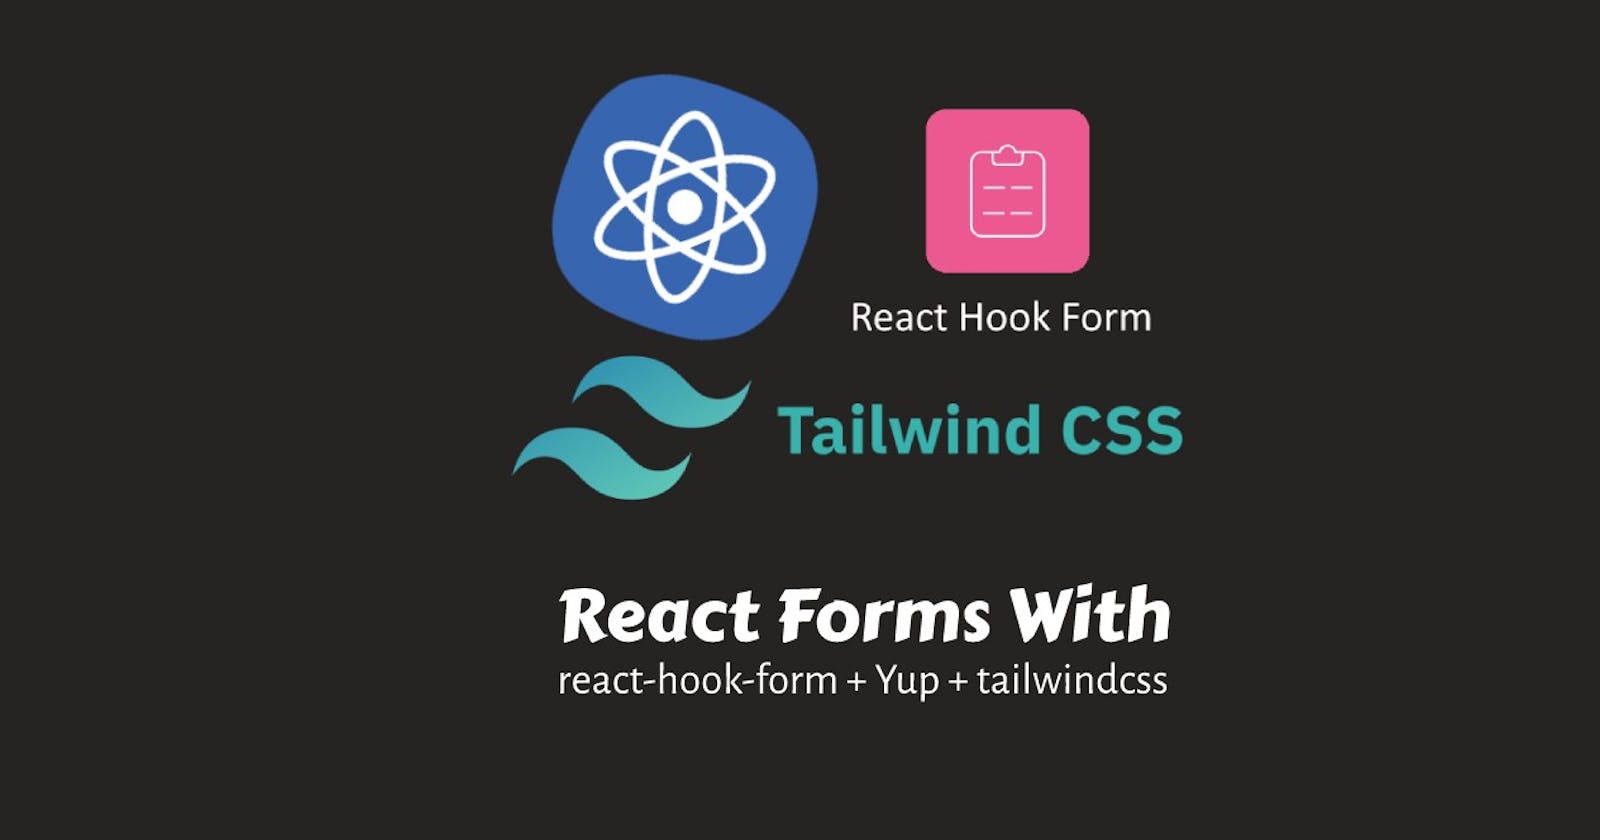 React forms with react-hook-form, tailwindcss and Yup for form input validation.